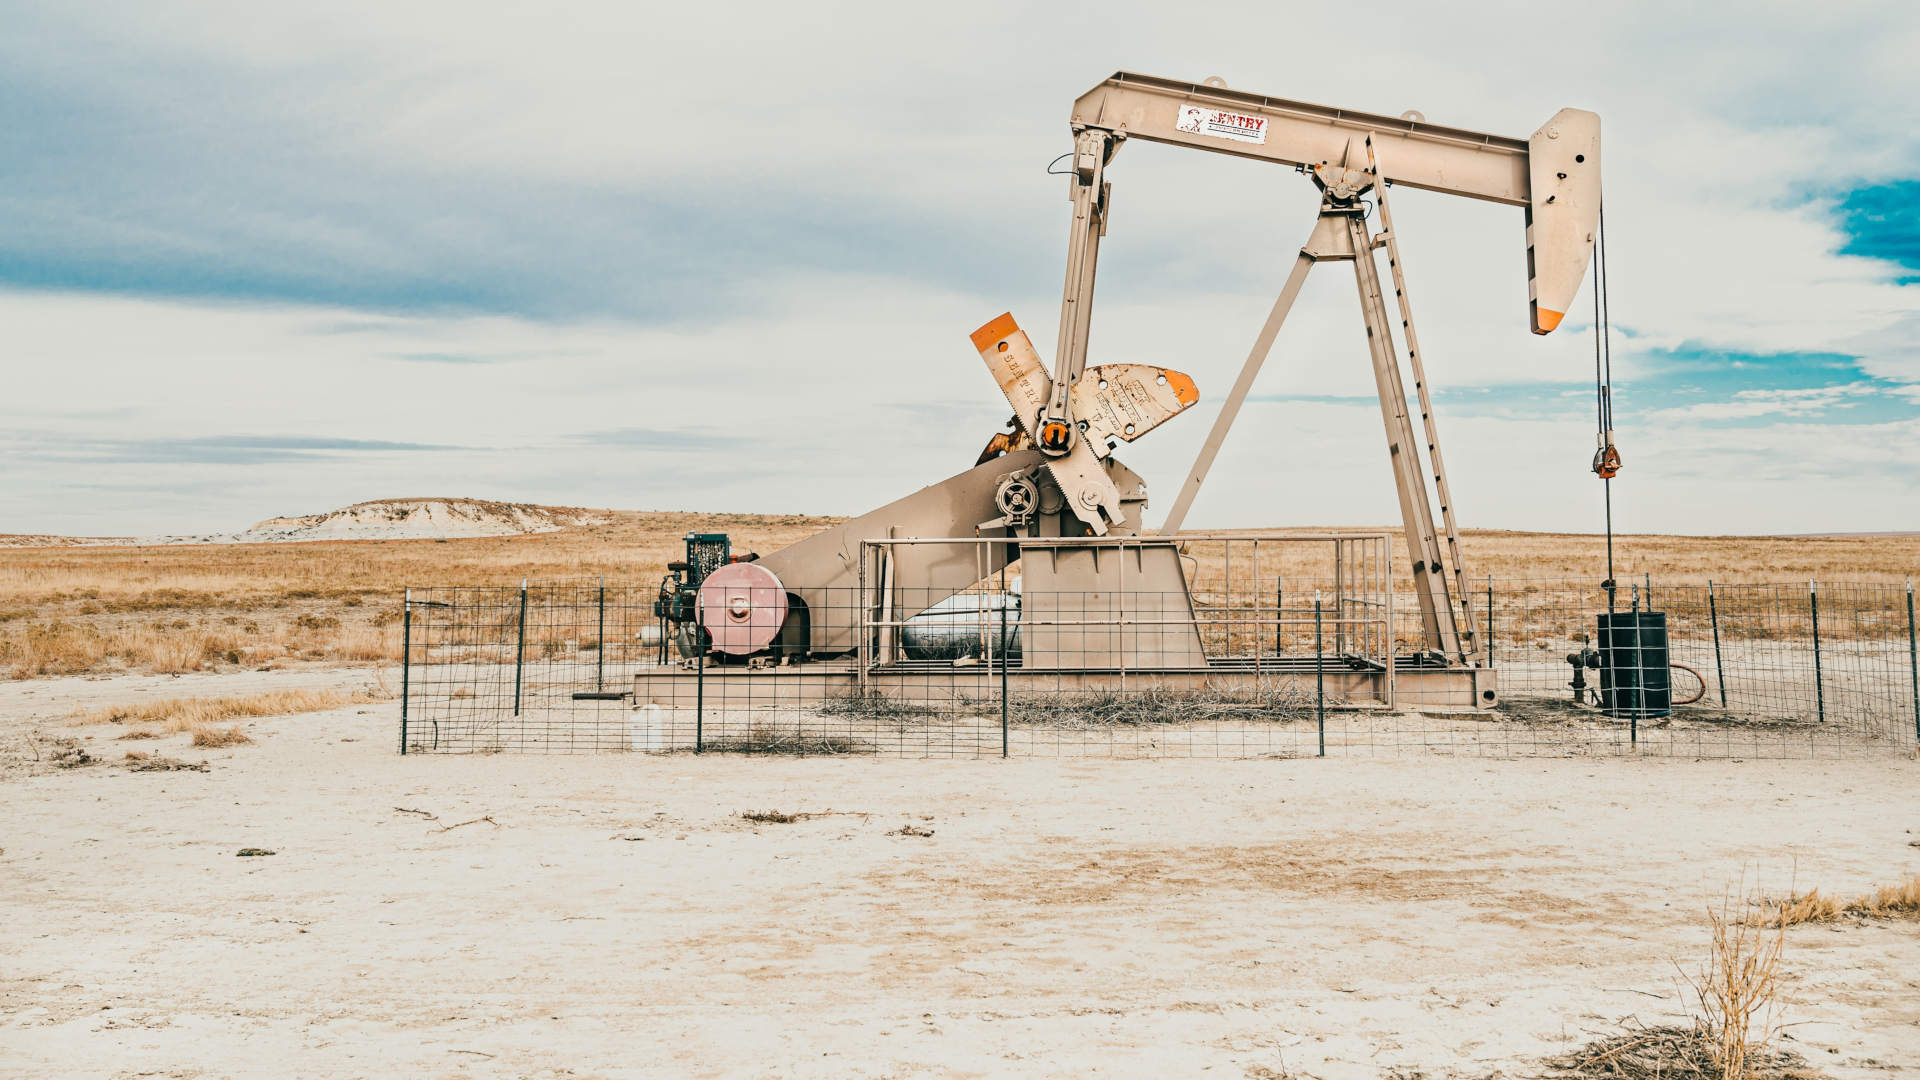 A pump jack extracts oil from a well.